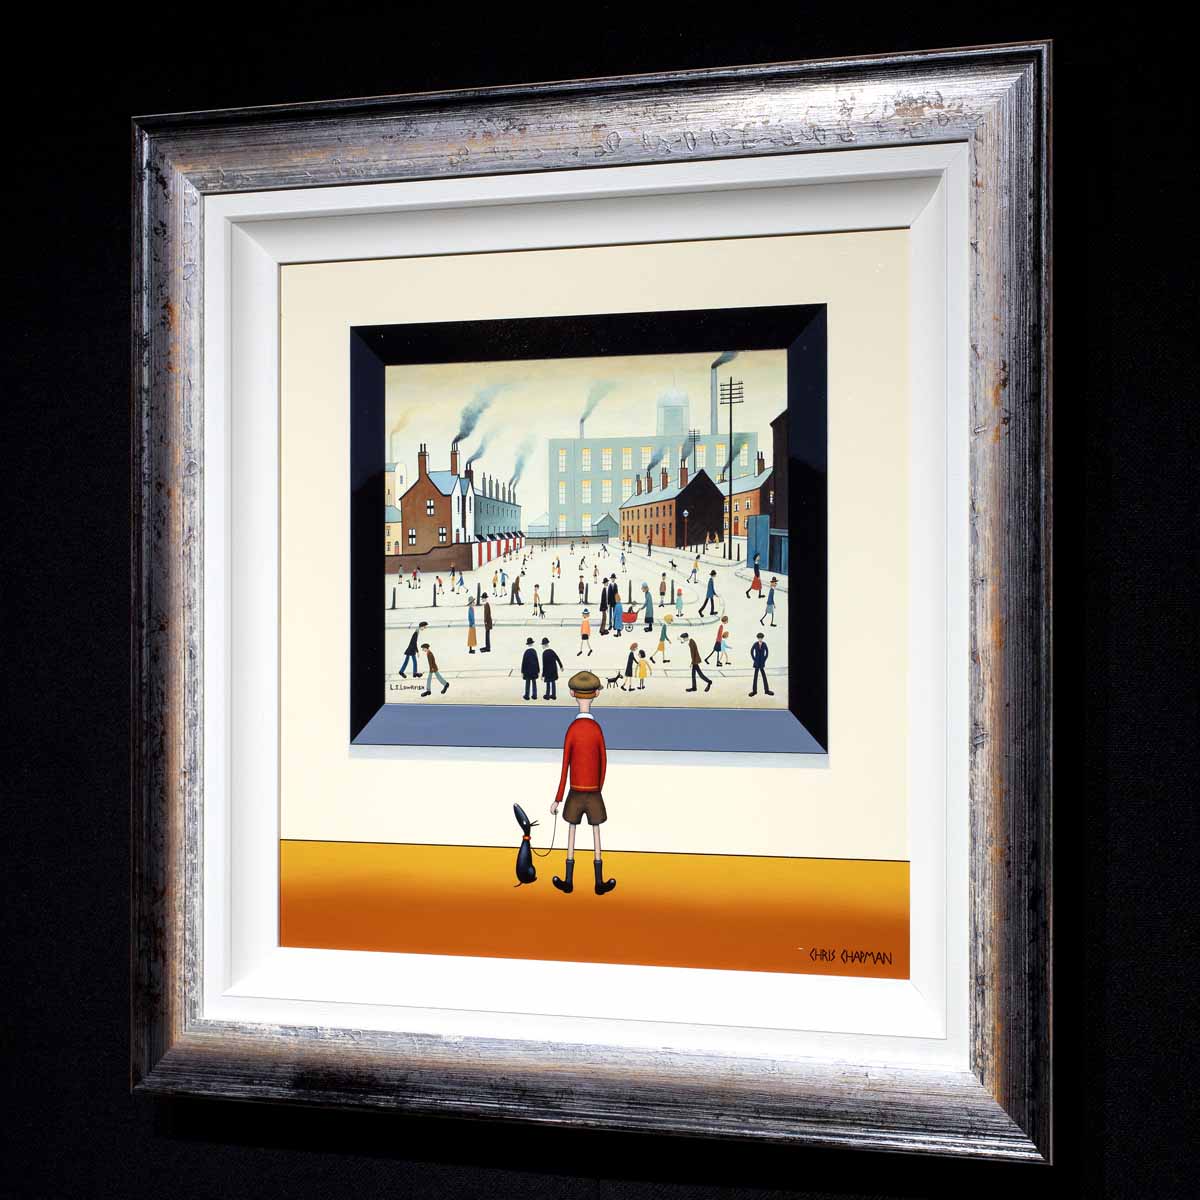 The Hustle and Bustle of Town - Original Chris Chapman Framed